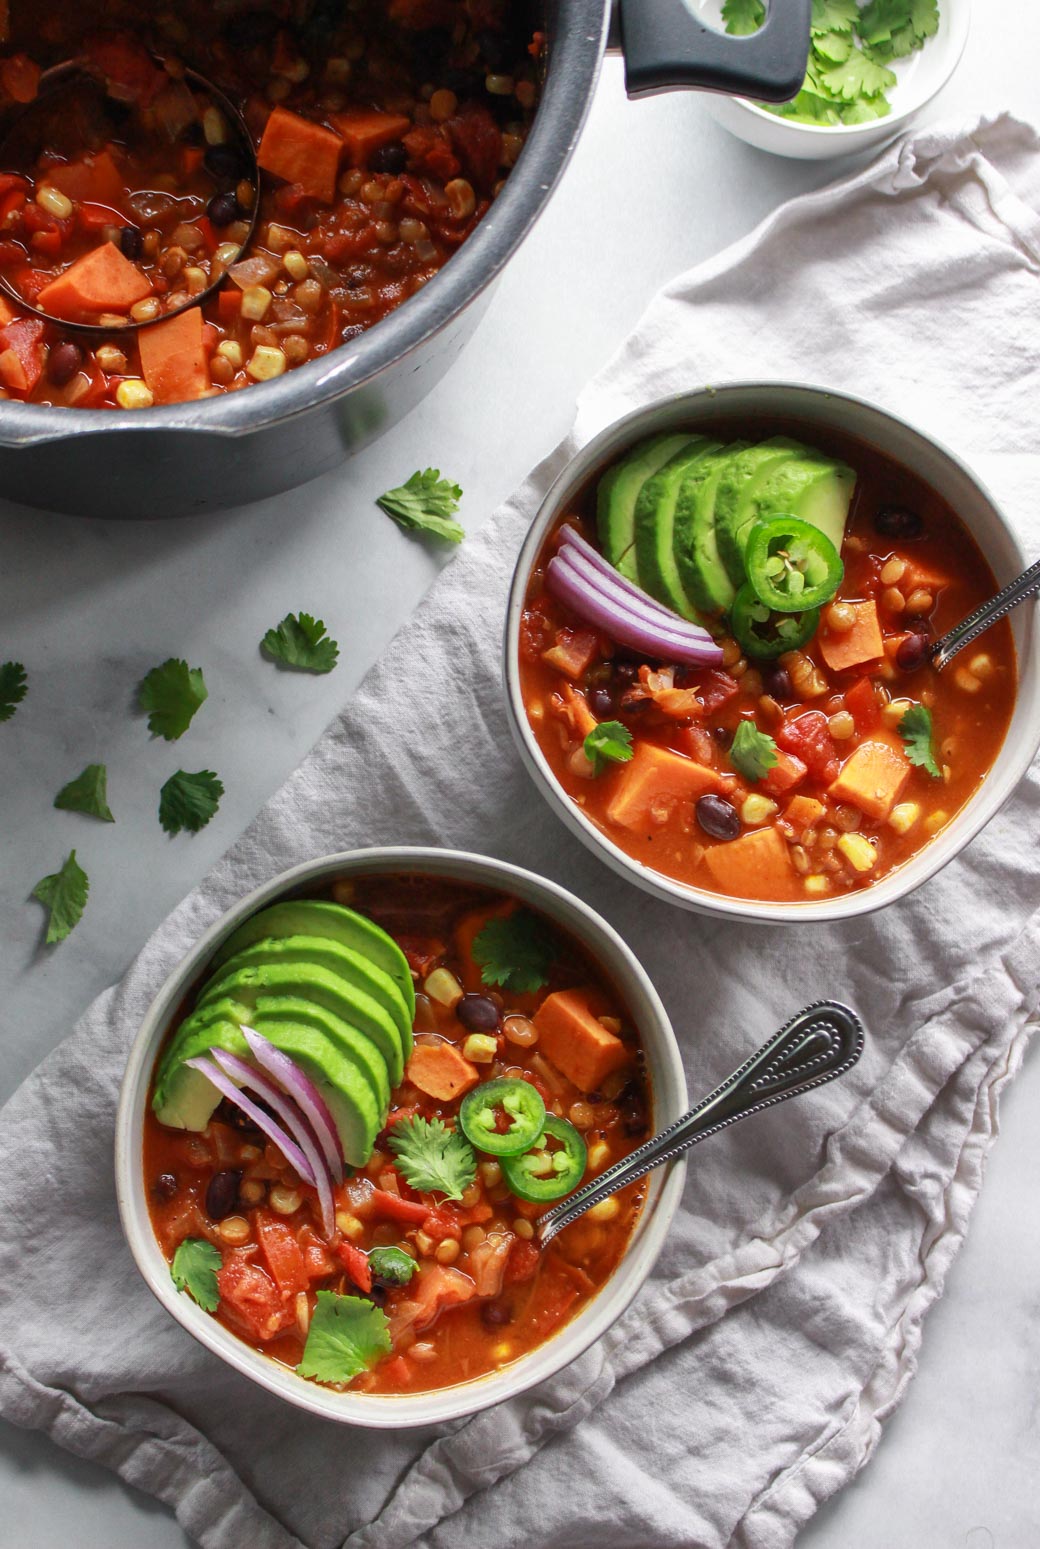 This warming lentil and sweet potato chili is the perfect comfort food for colder months. Packed full of flavor, this vegan sweet potato chili recipe is also gluten-free.